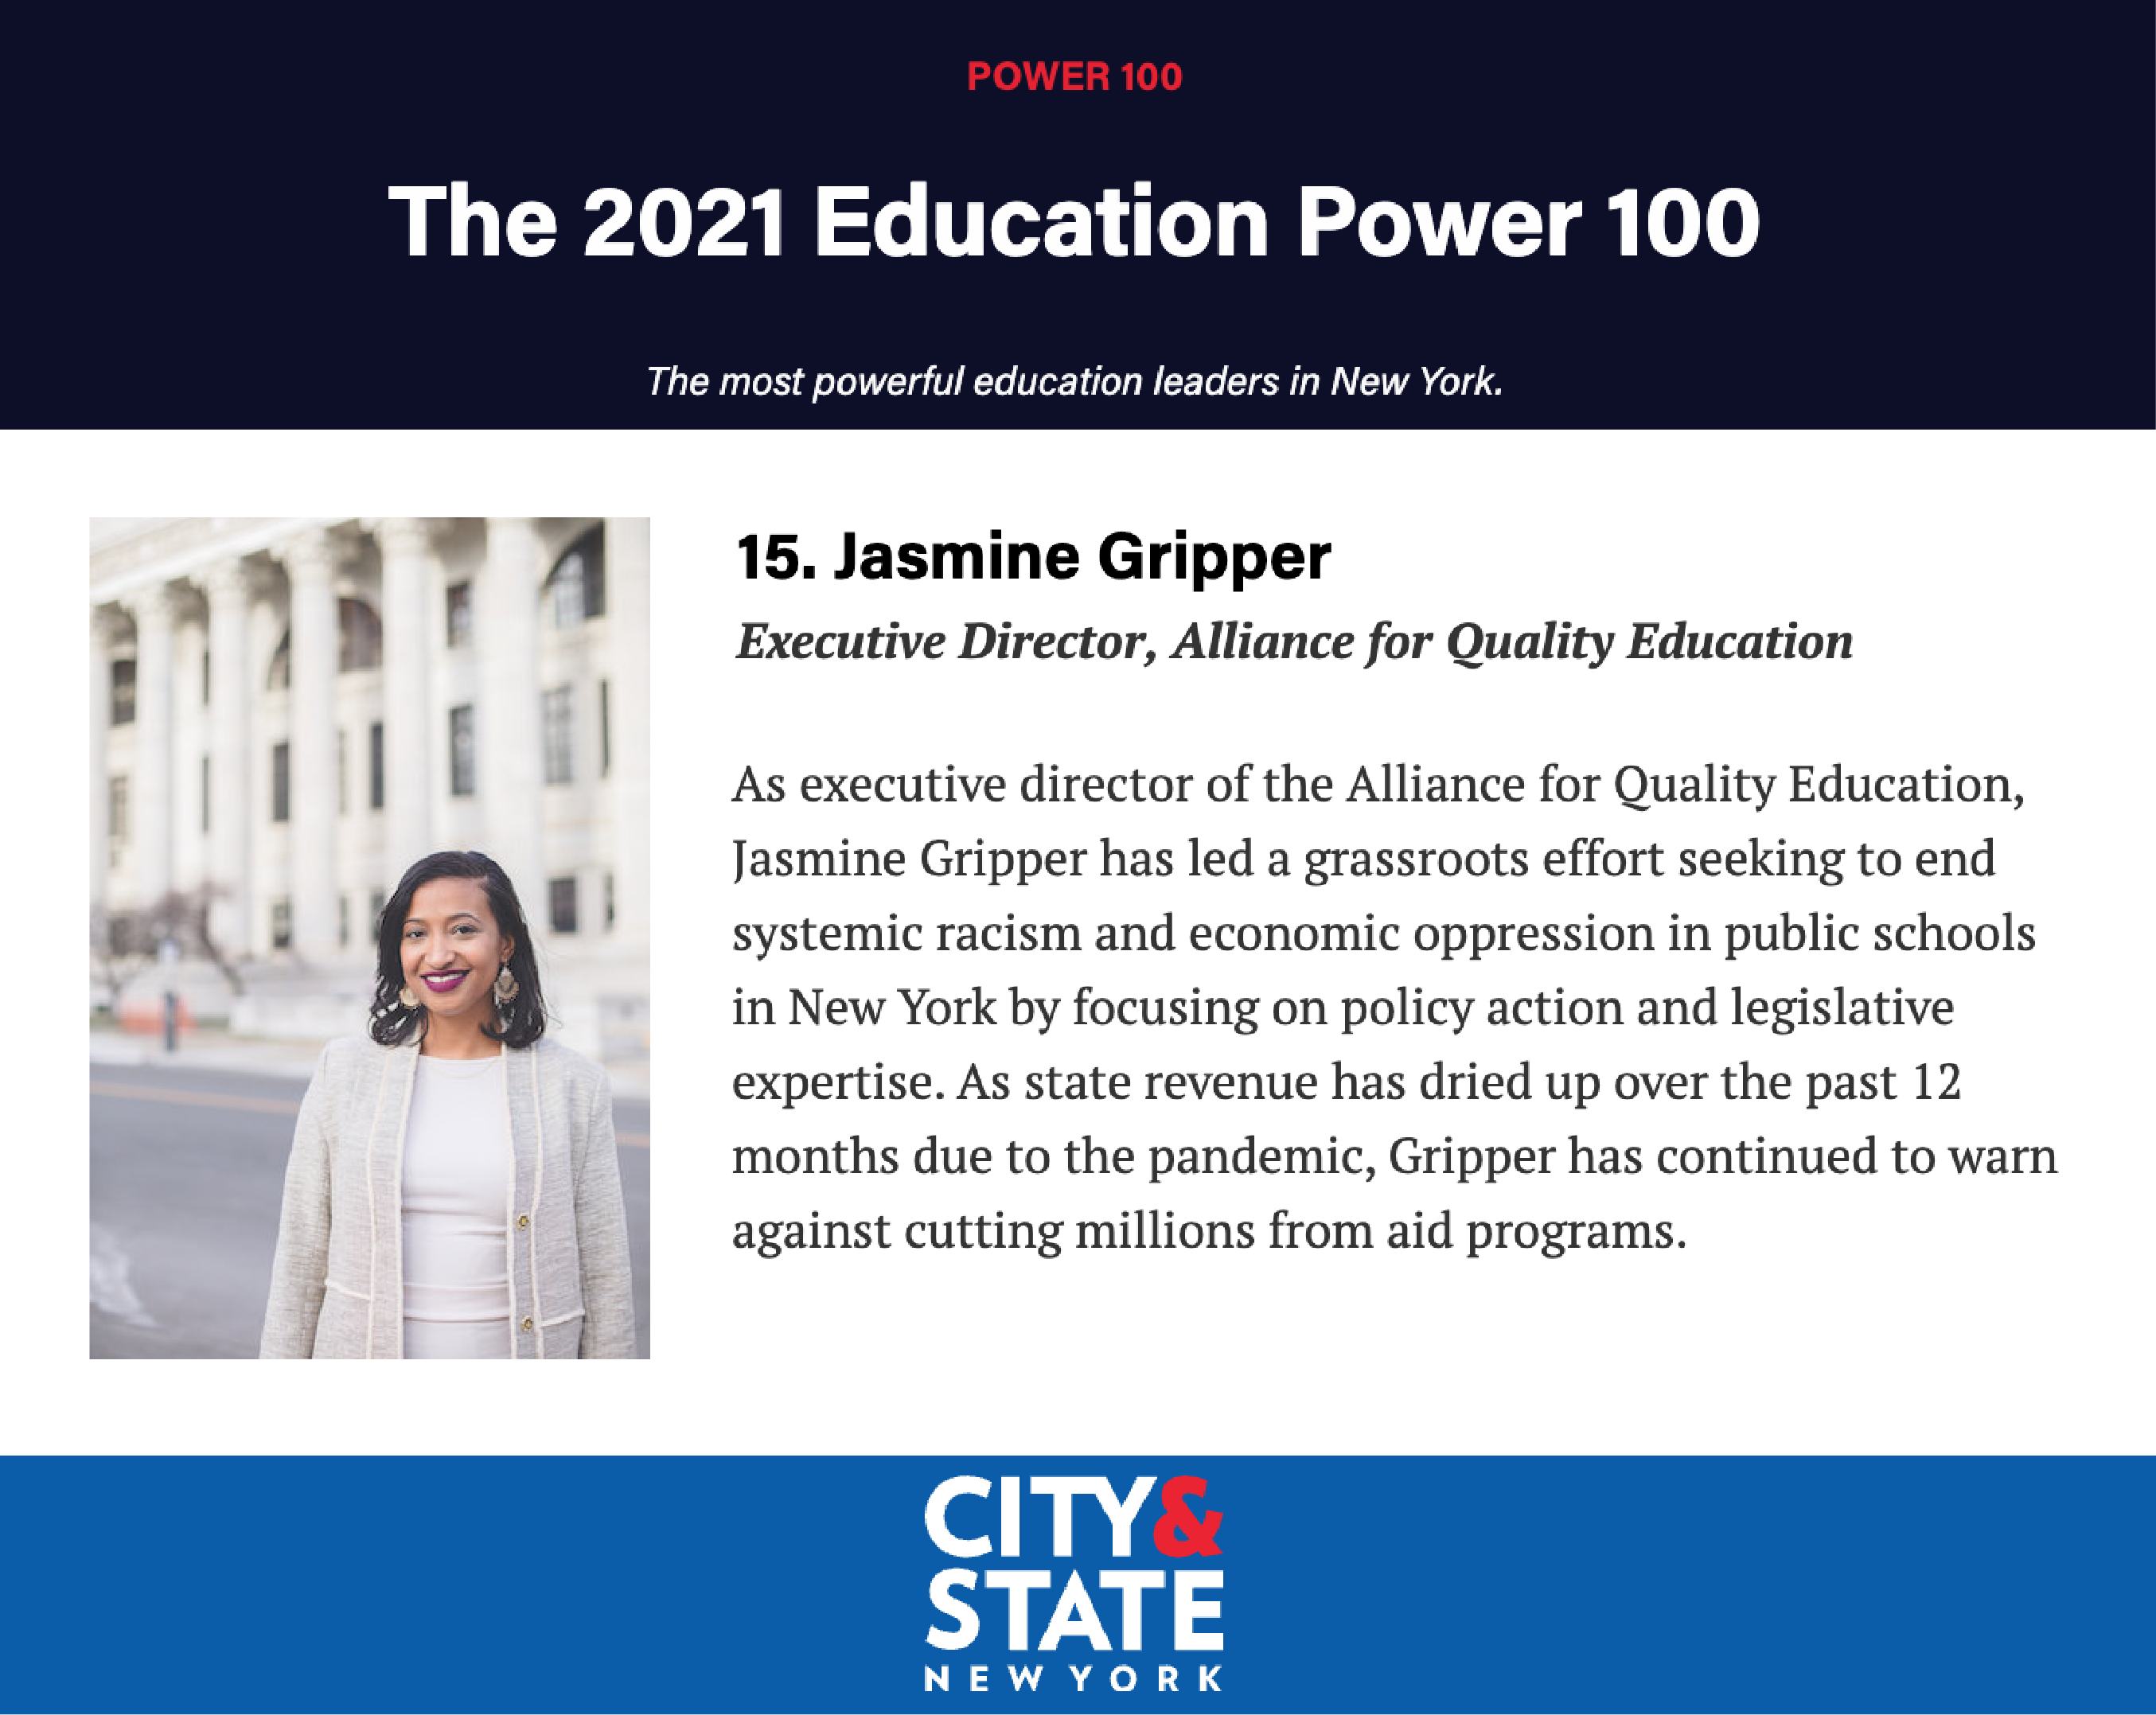 AQE's Jasmine Gripper Recognized in City & State Education Power 100 1